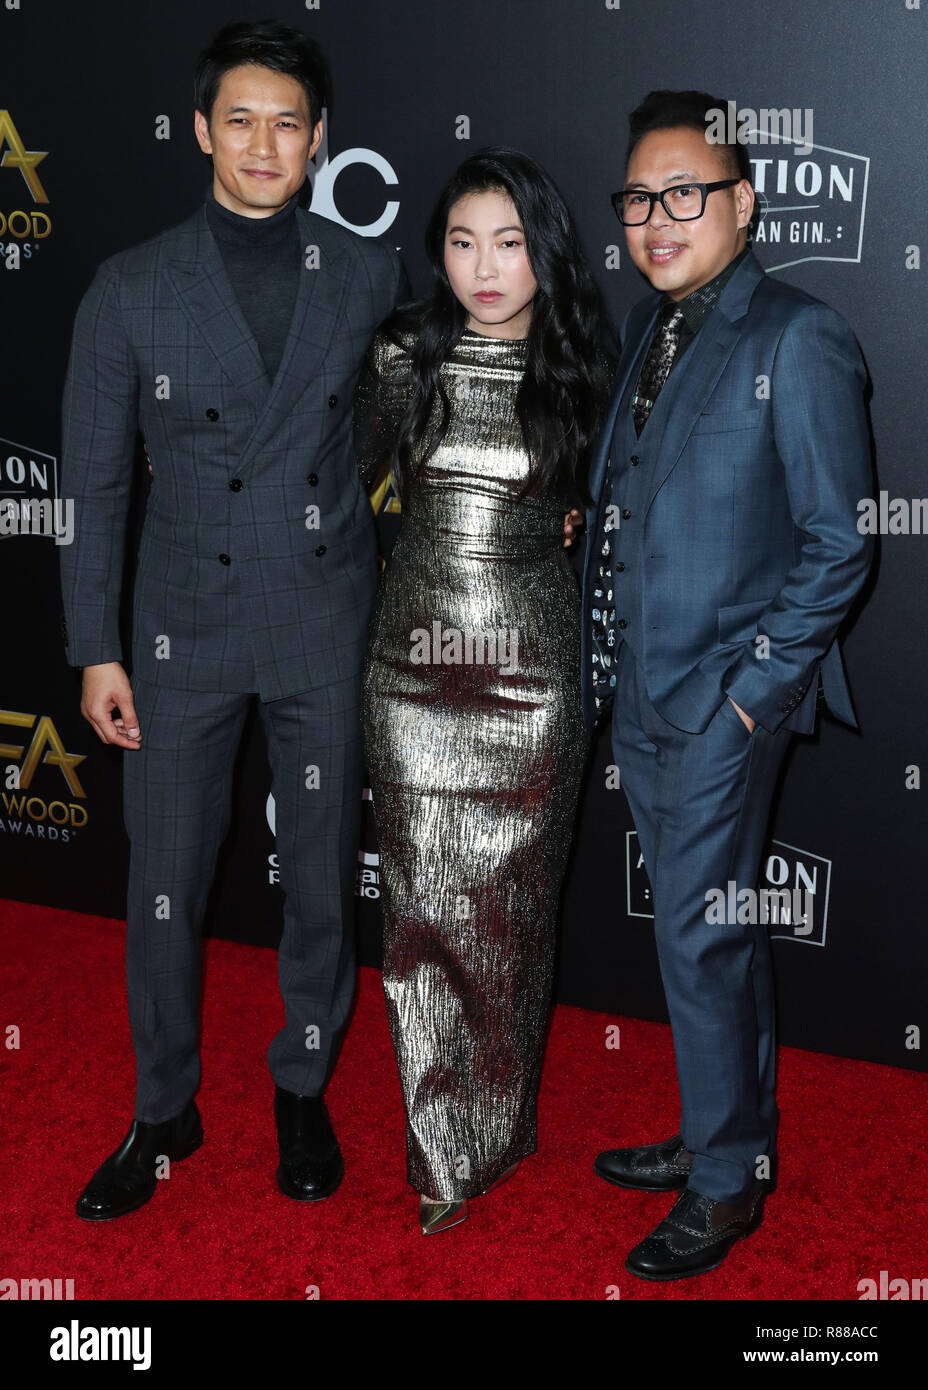 BEVERLY HILLS, LOS ANGELES, CA, USA - NOVEMBER 04: Harry Shum Jr., Awkwafina, Nico Santos at the 22nd Annual Hollywood Film Awards held at The Beverly Hilton Hotel on November 4, 2018 in Beverly Hills, Los Angeles, California, United States. (Photo by Xavier Collin/Image Press Agency) Stock Photo